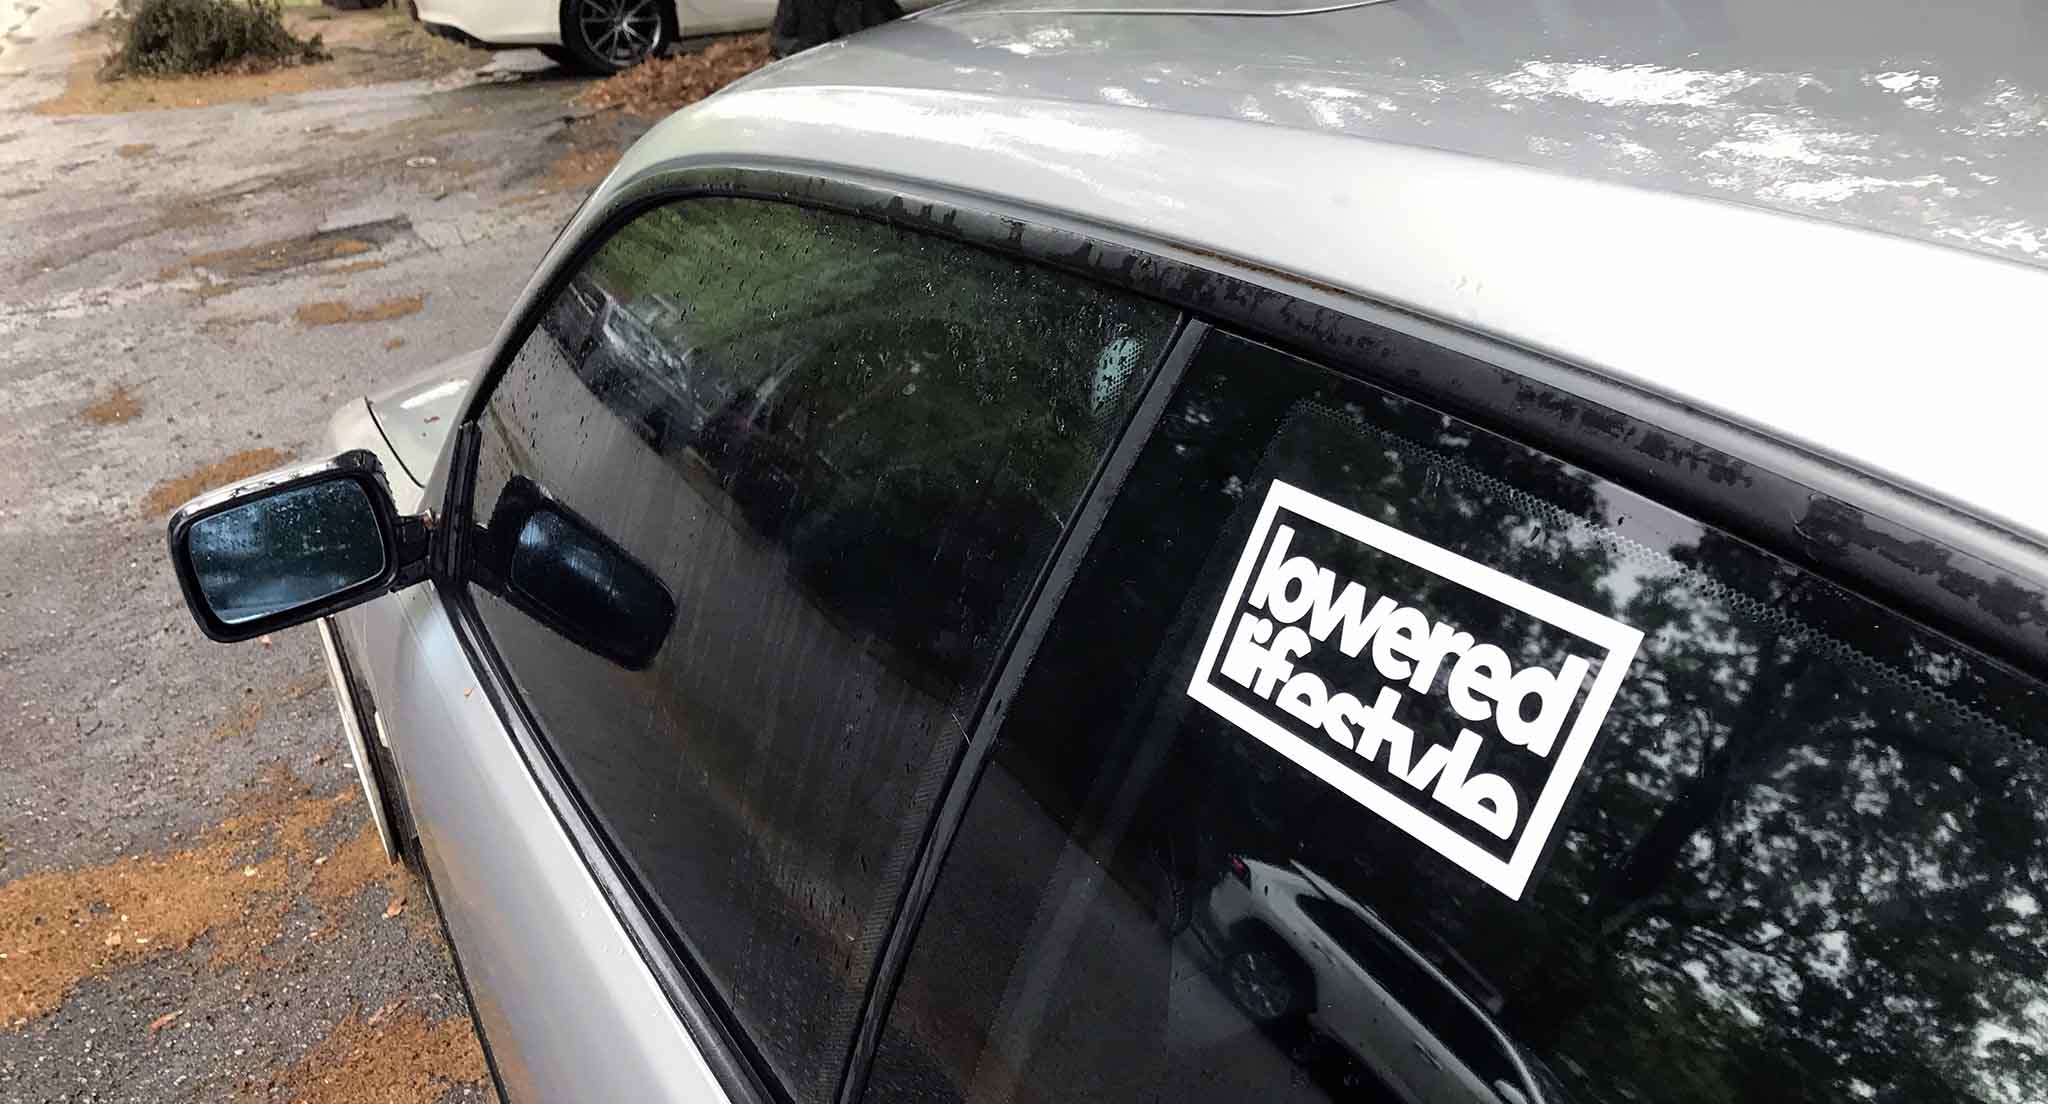 Picture of the Lowered Lifestyle sticker on a BMW car